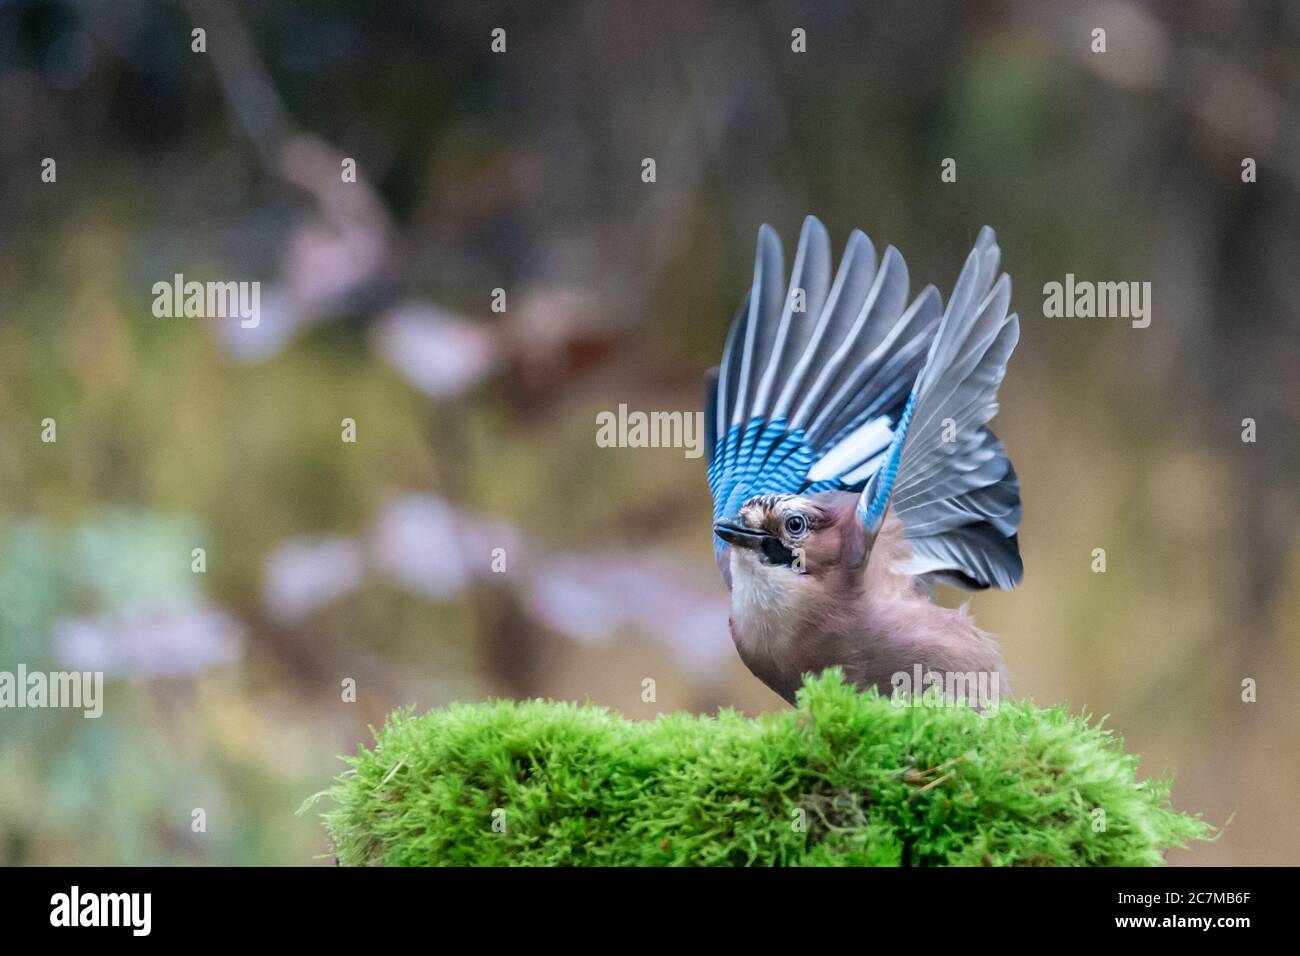 Closeup shot of a blue jay bird getting ready to fly on a blurred background Stock Photo